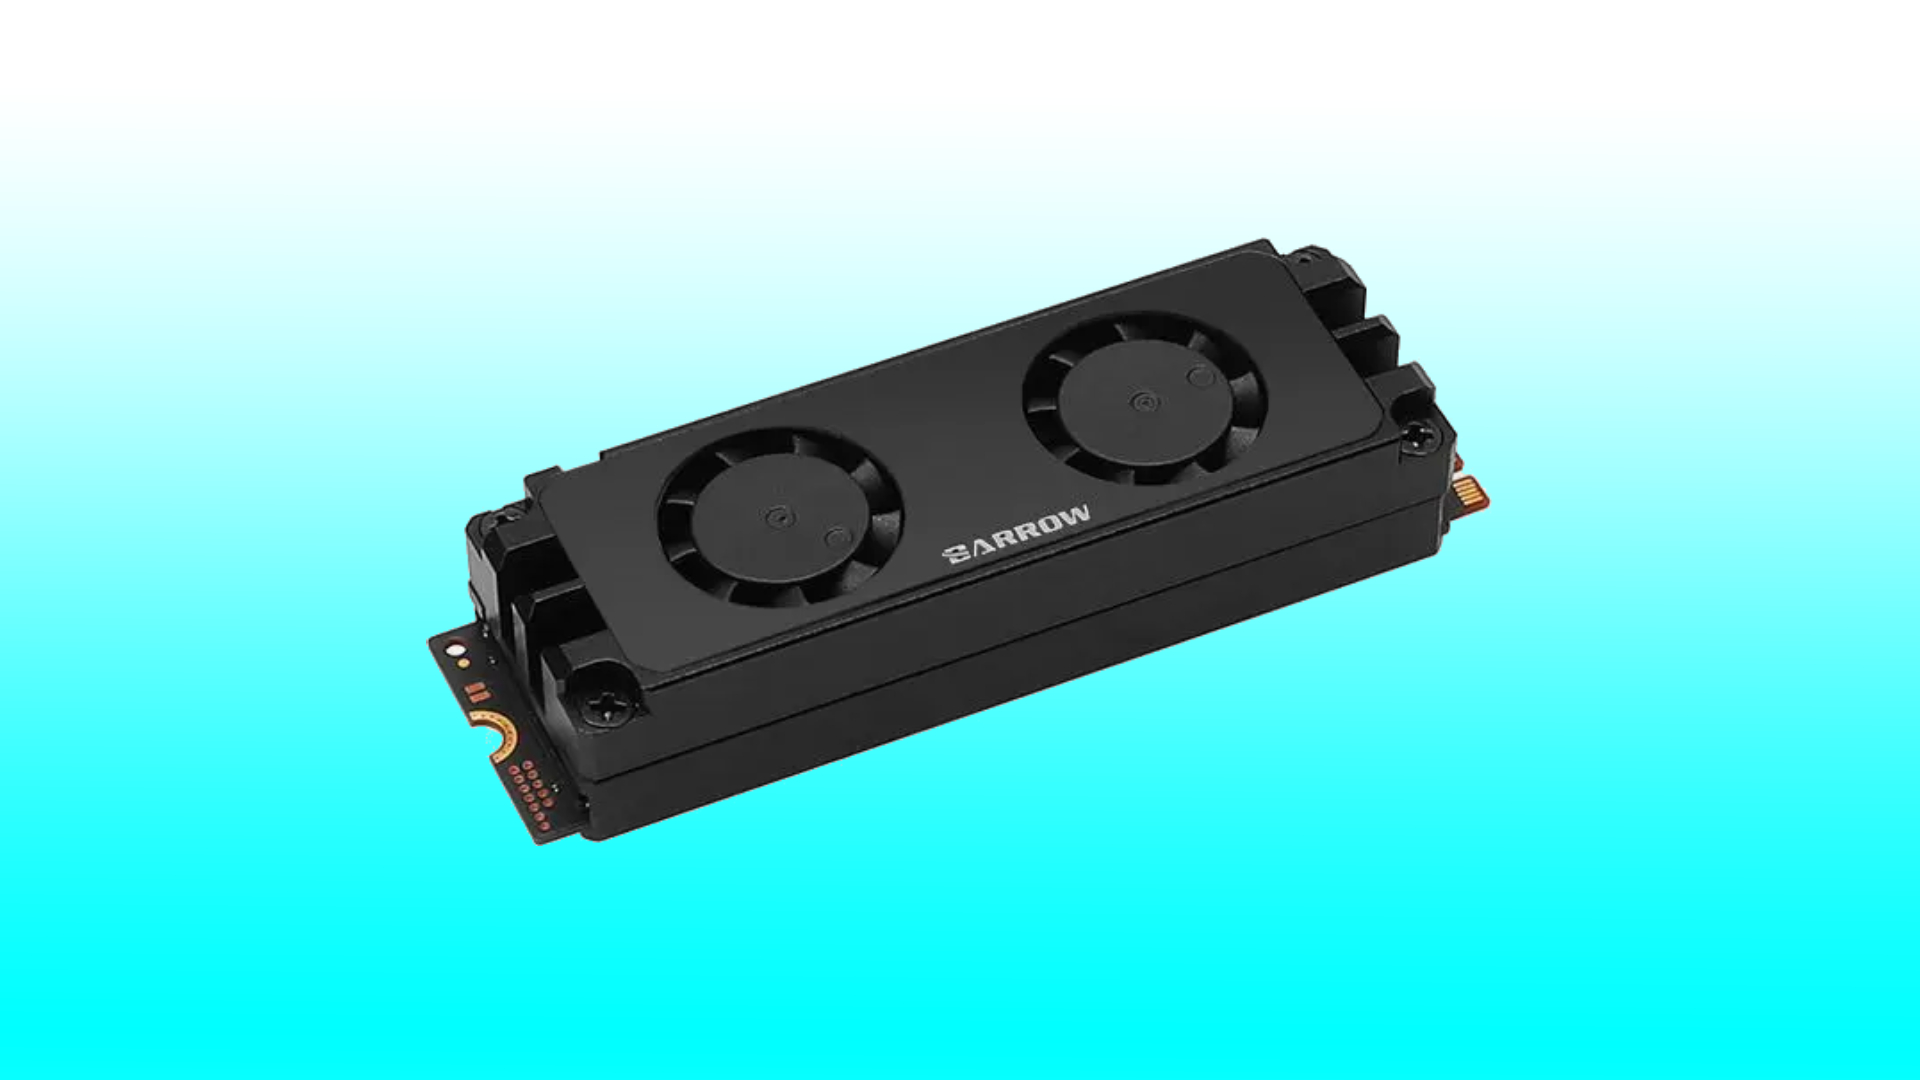 Your future SSD could require GPU style cooling fans